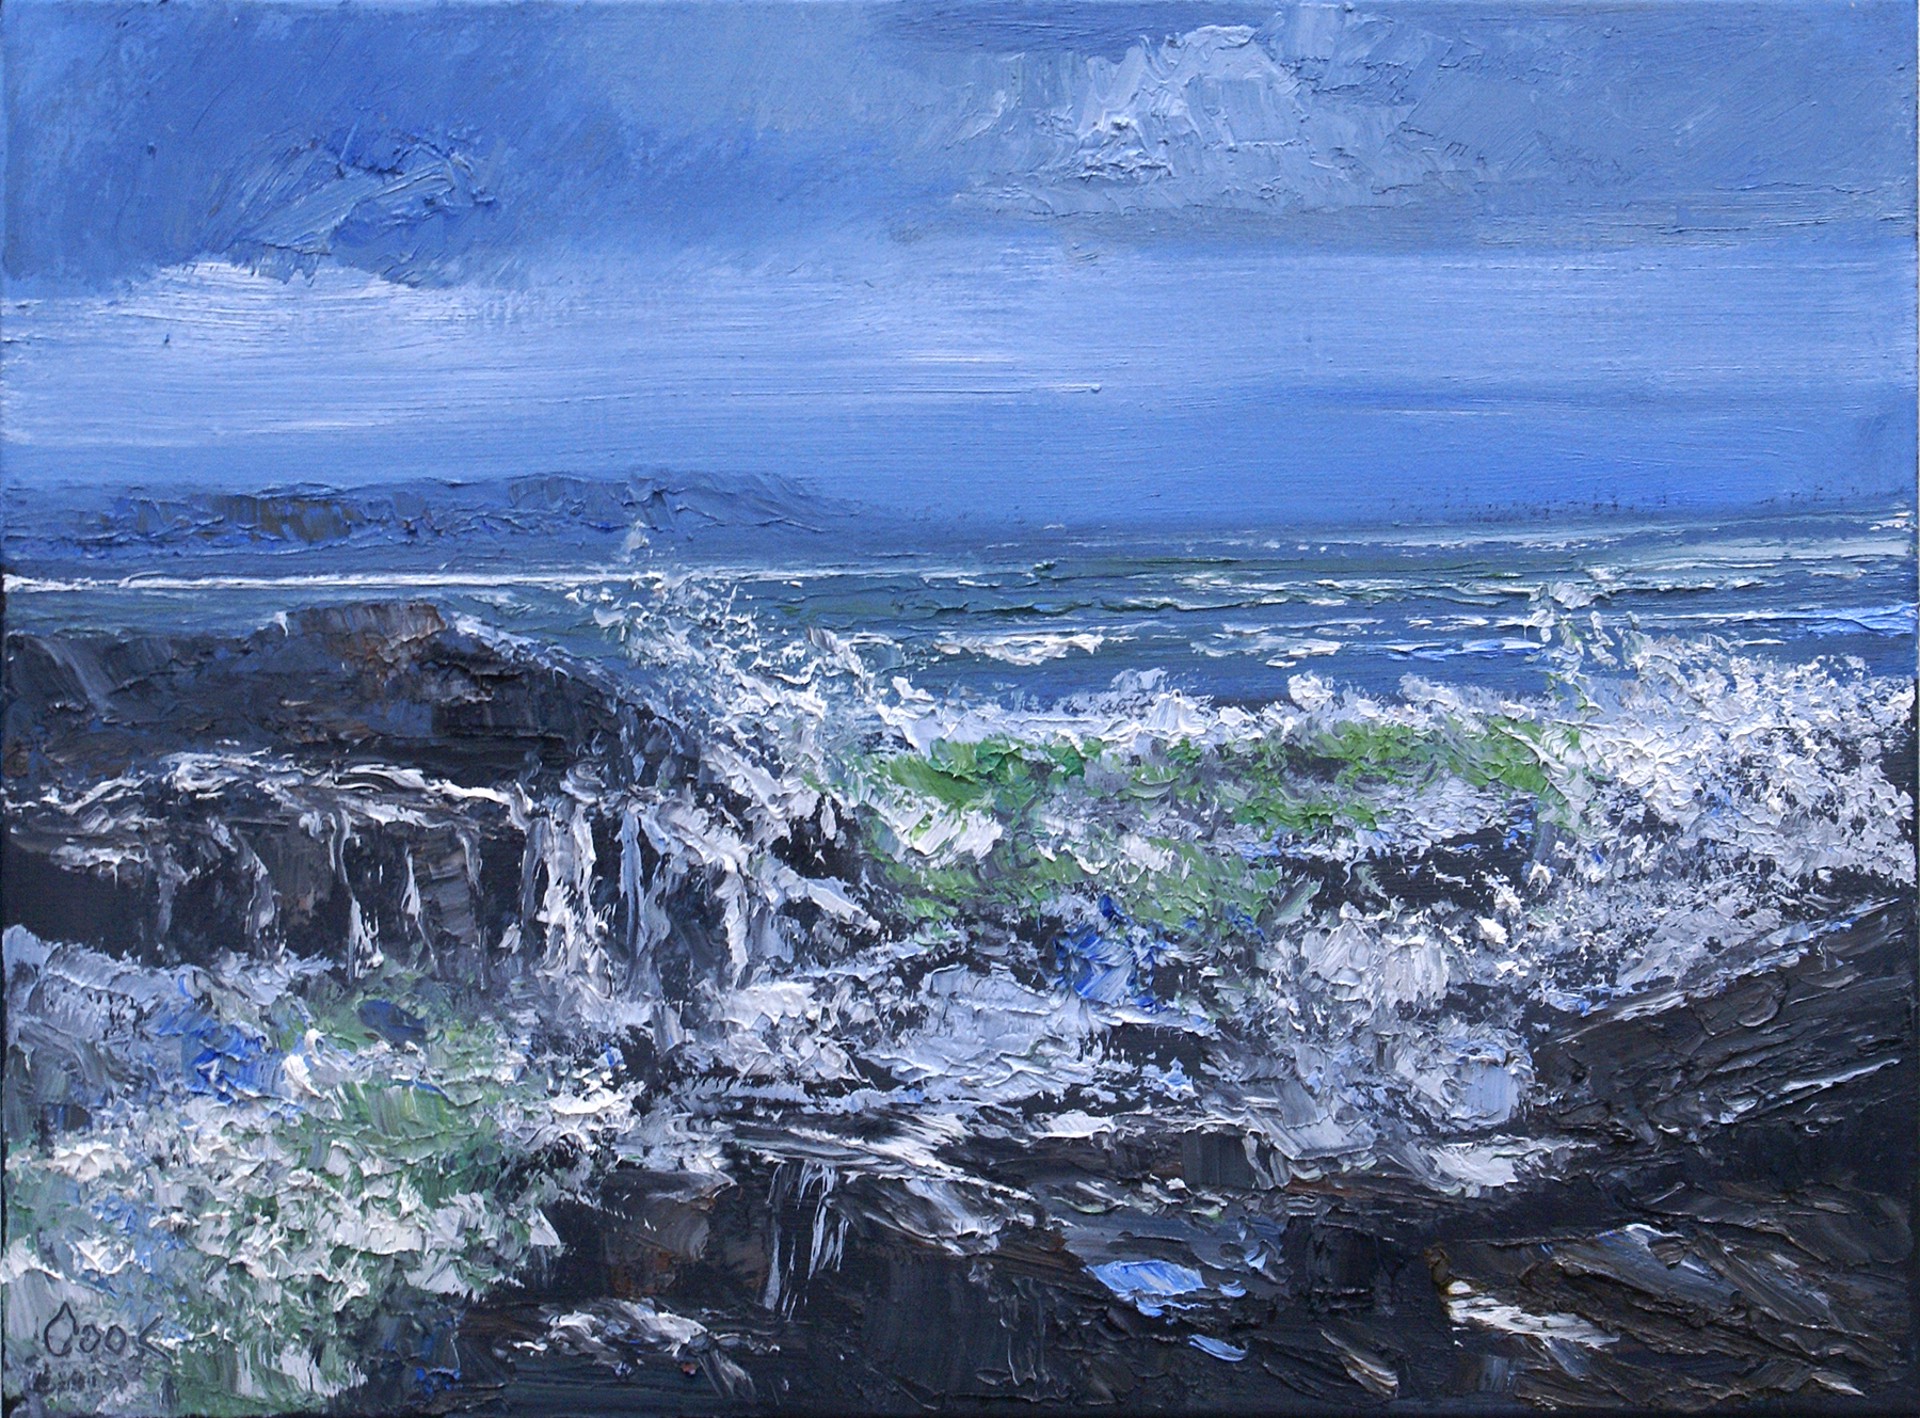 Casco Bay Study #2 by James Cook